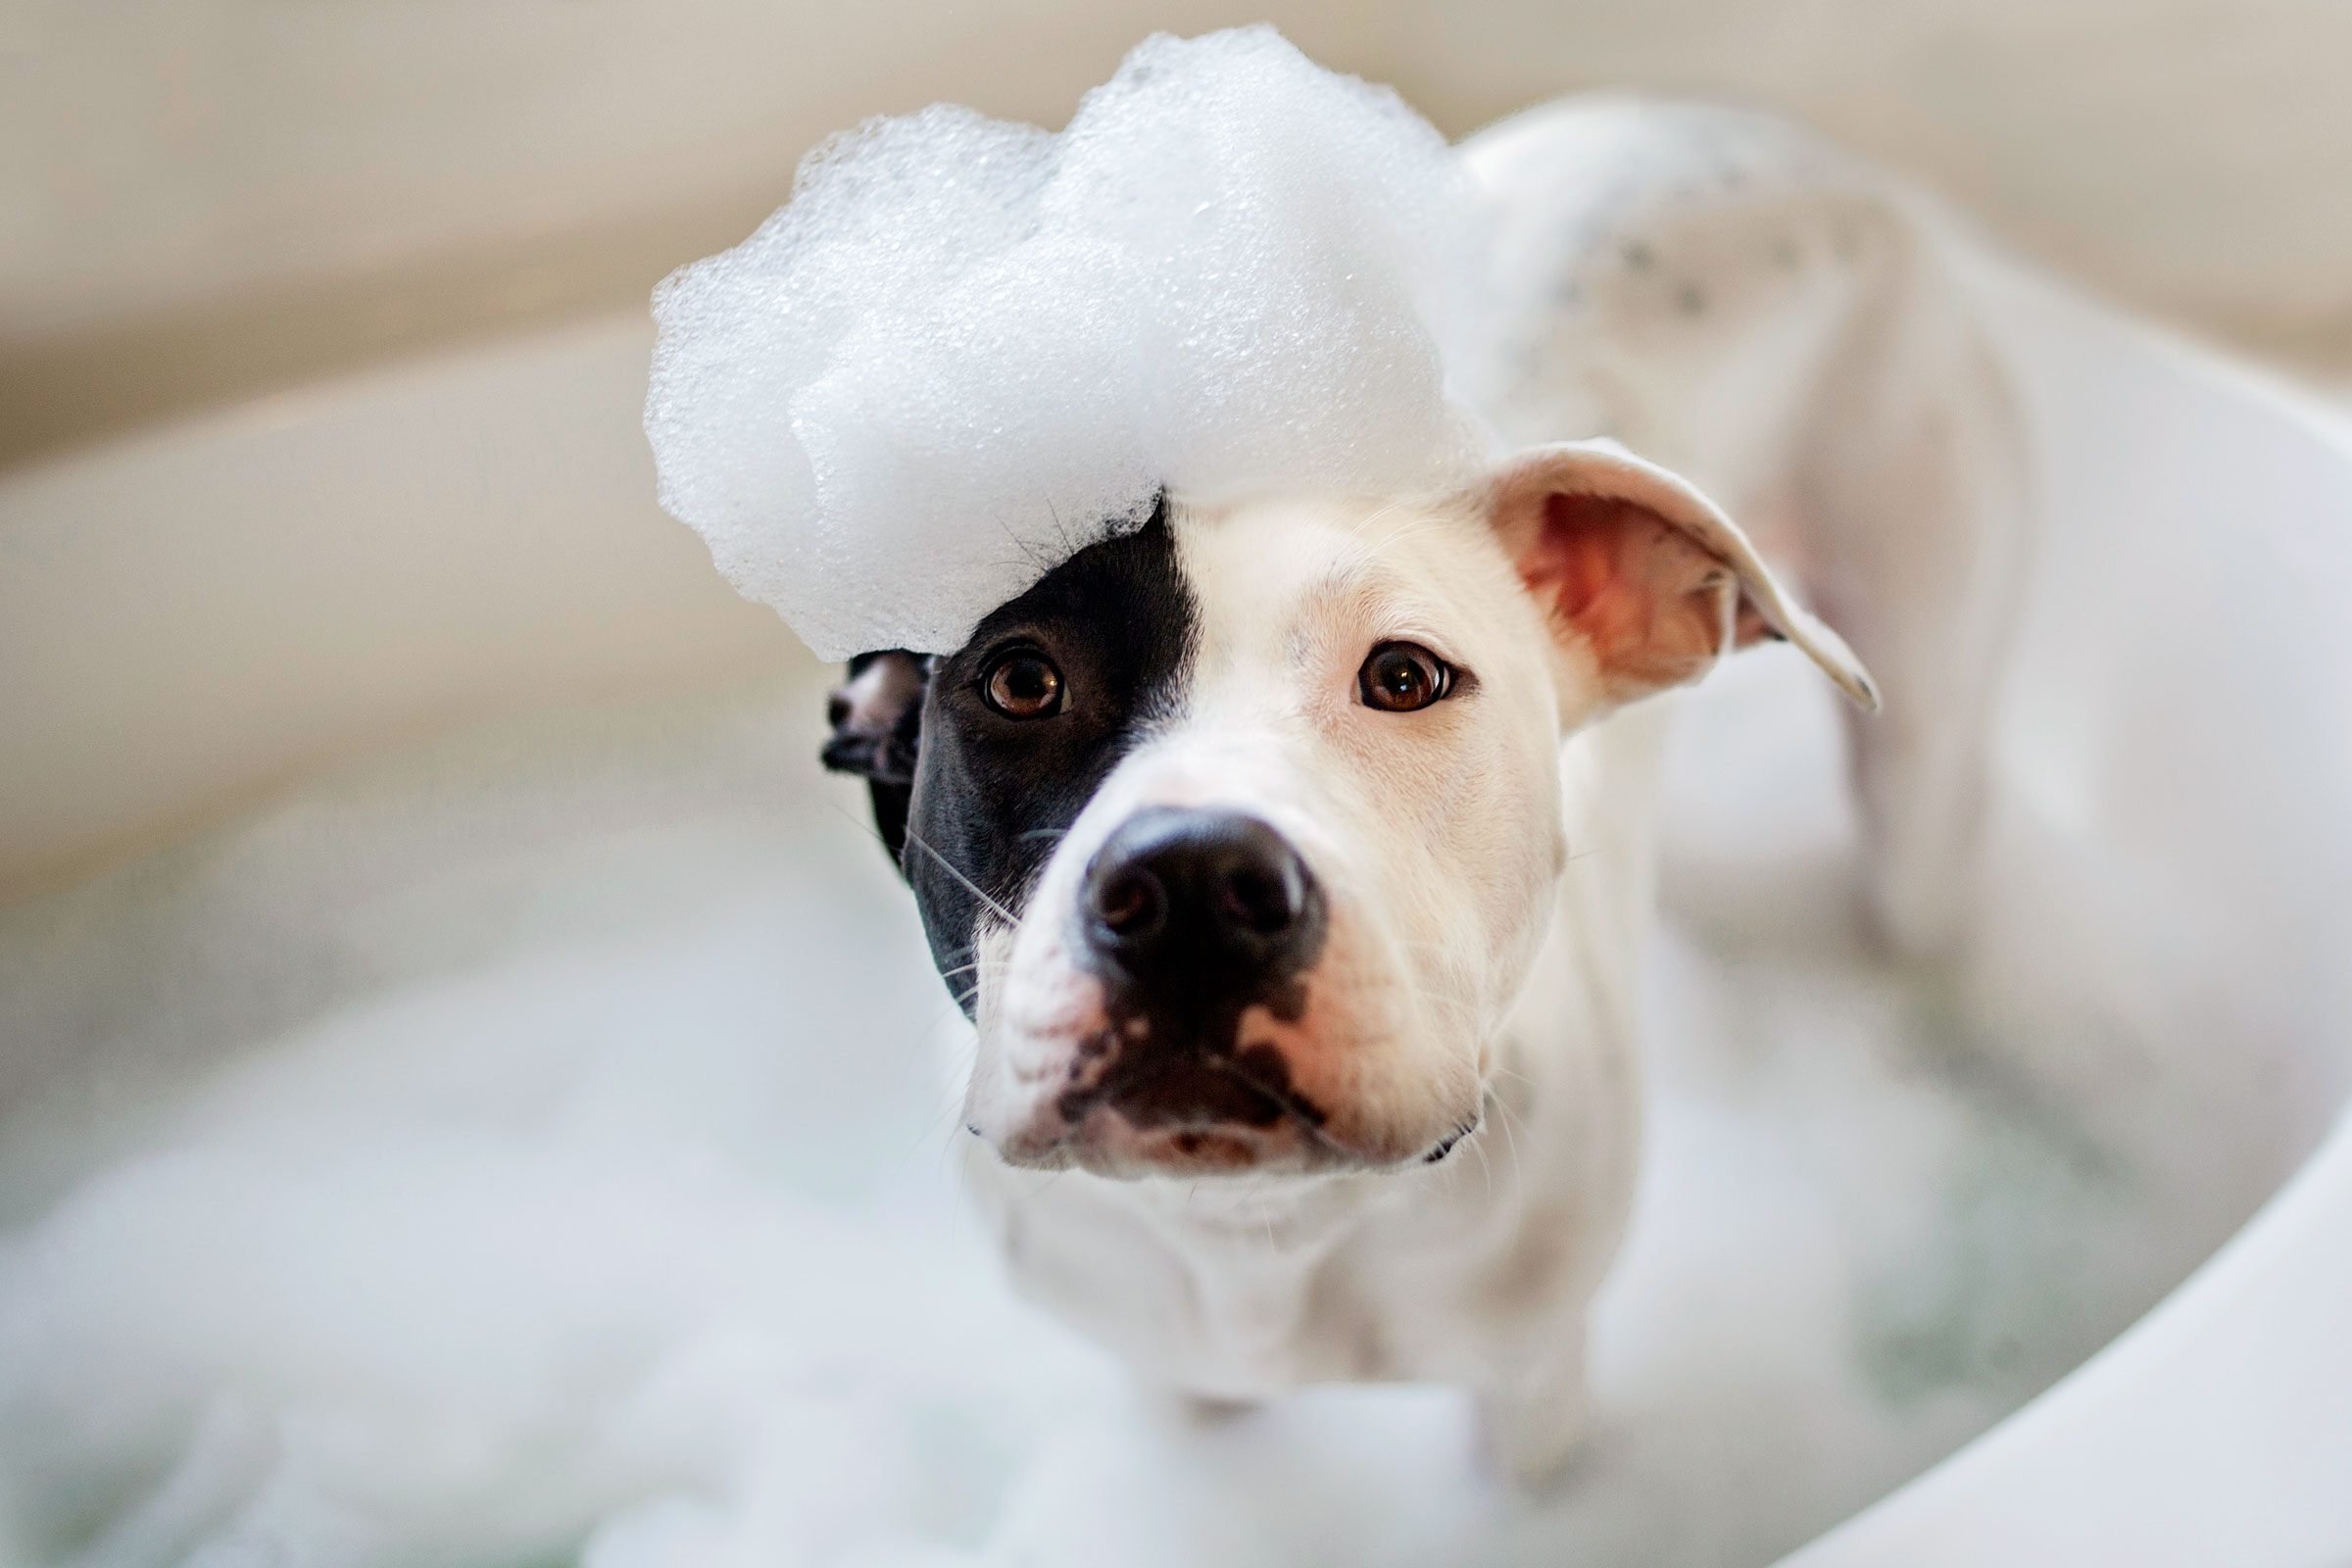 Best Pet Grooming: Bubbles Pet Spa - Easy Reader News